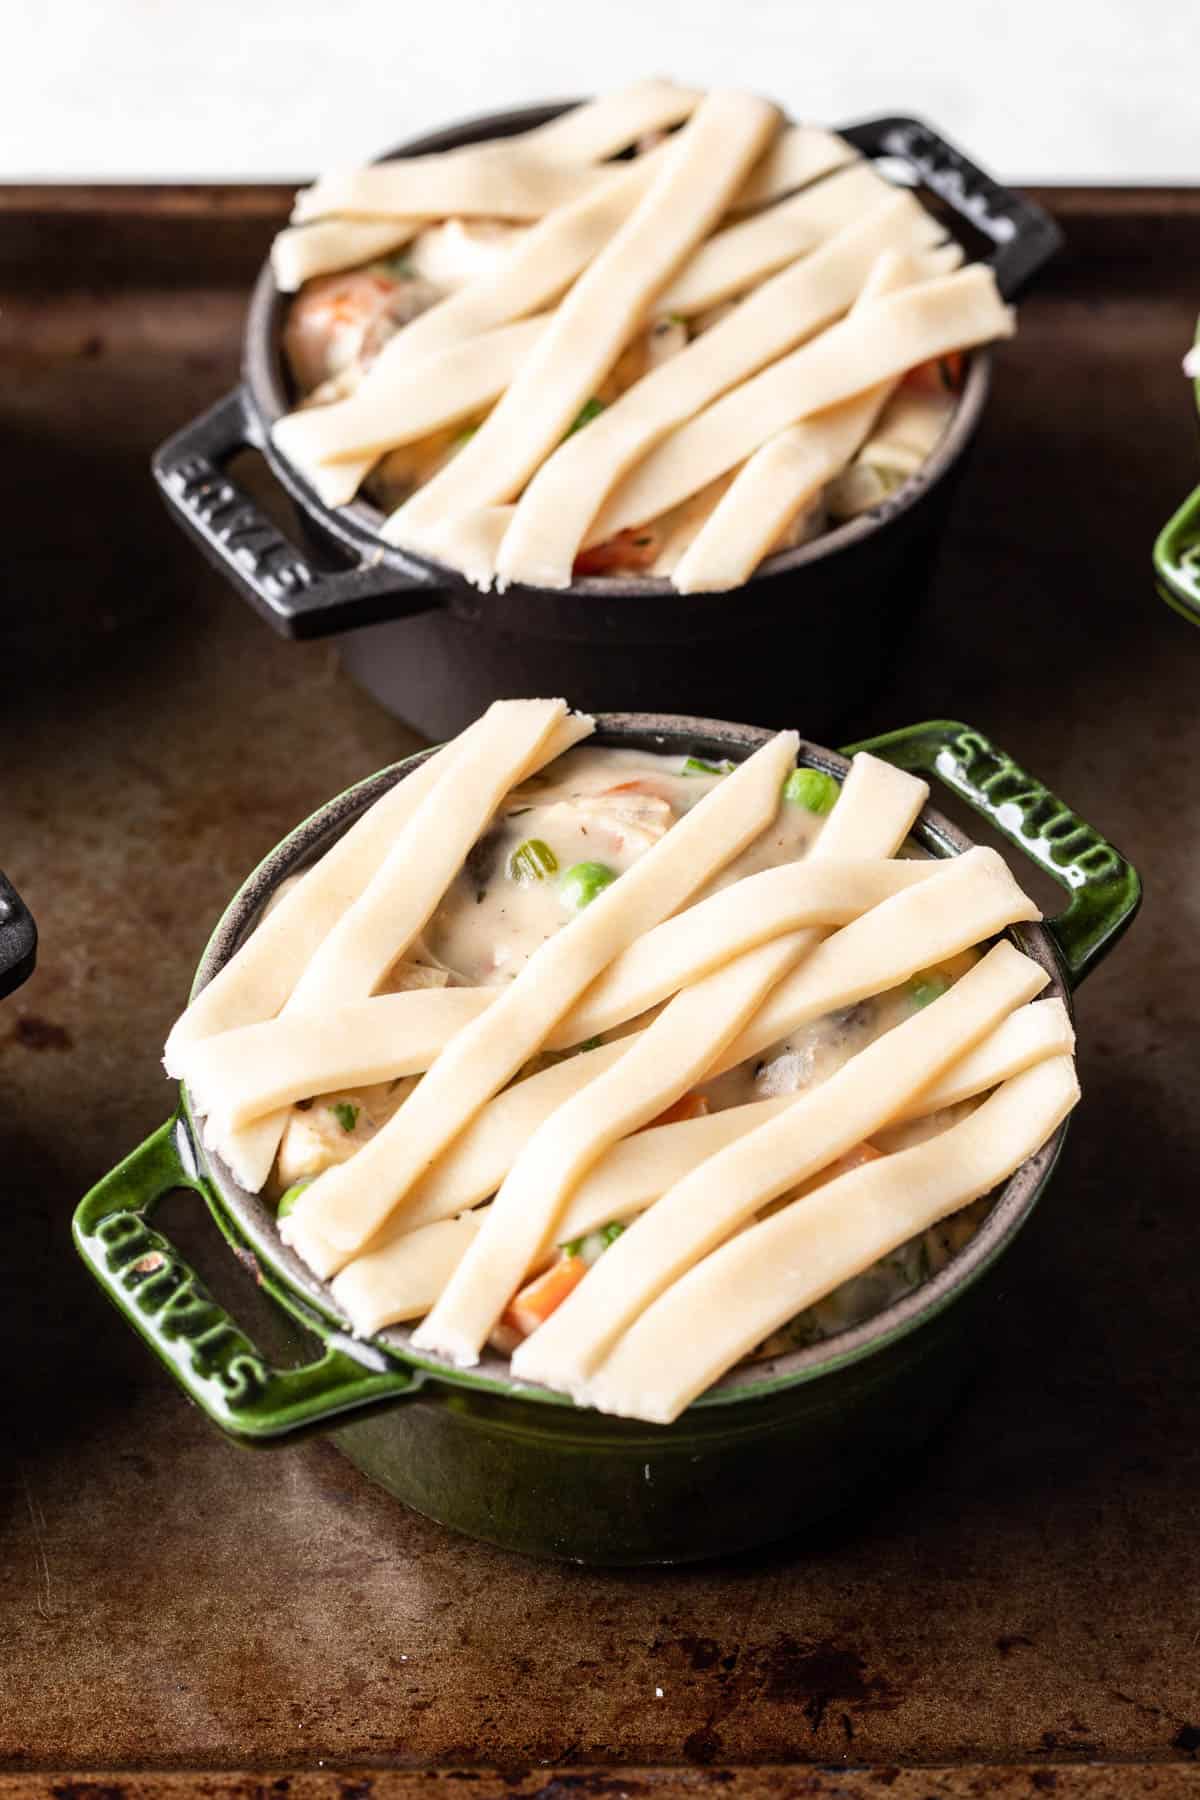 Strips of pie dough forming a lattice crust over chicken pot pie filling in individual cast iron pans.